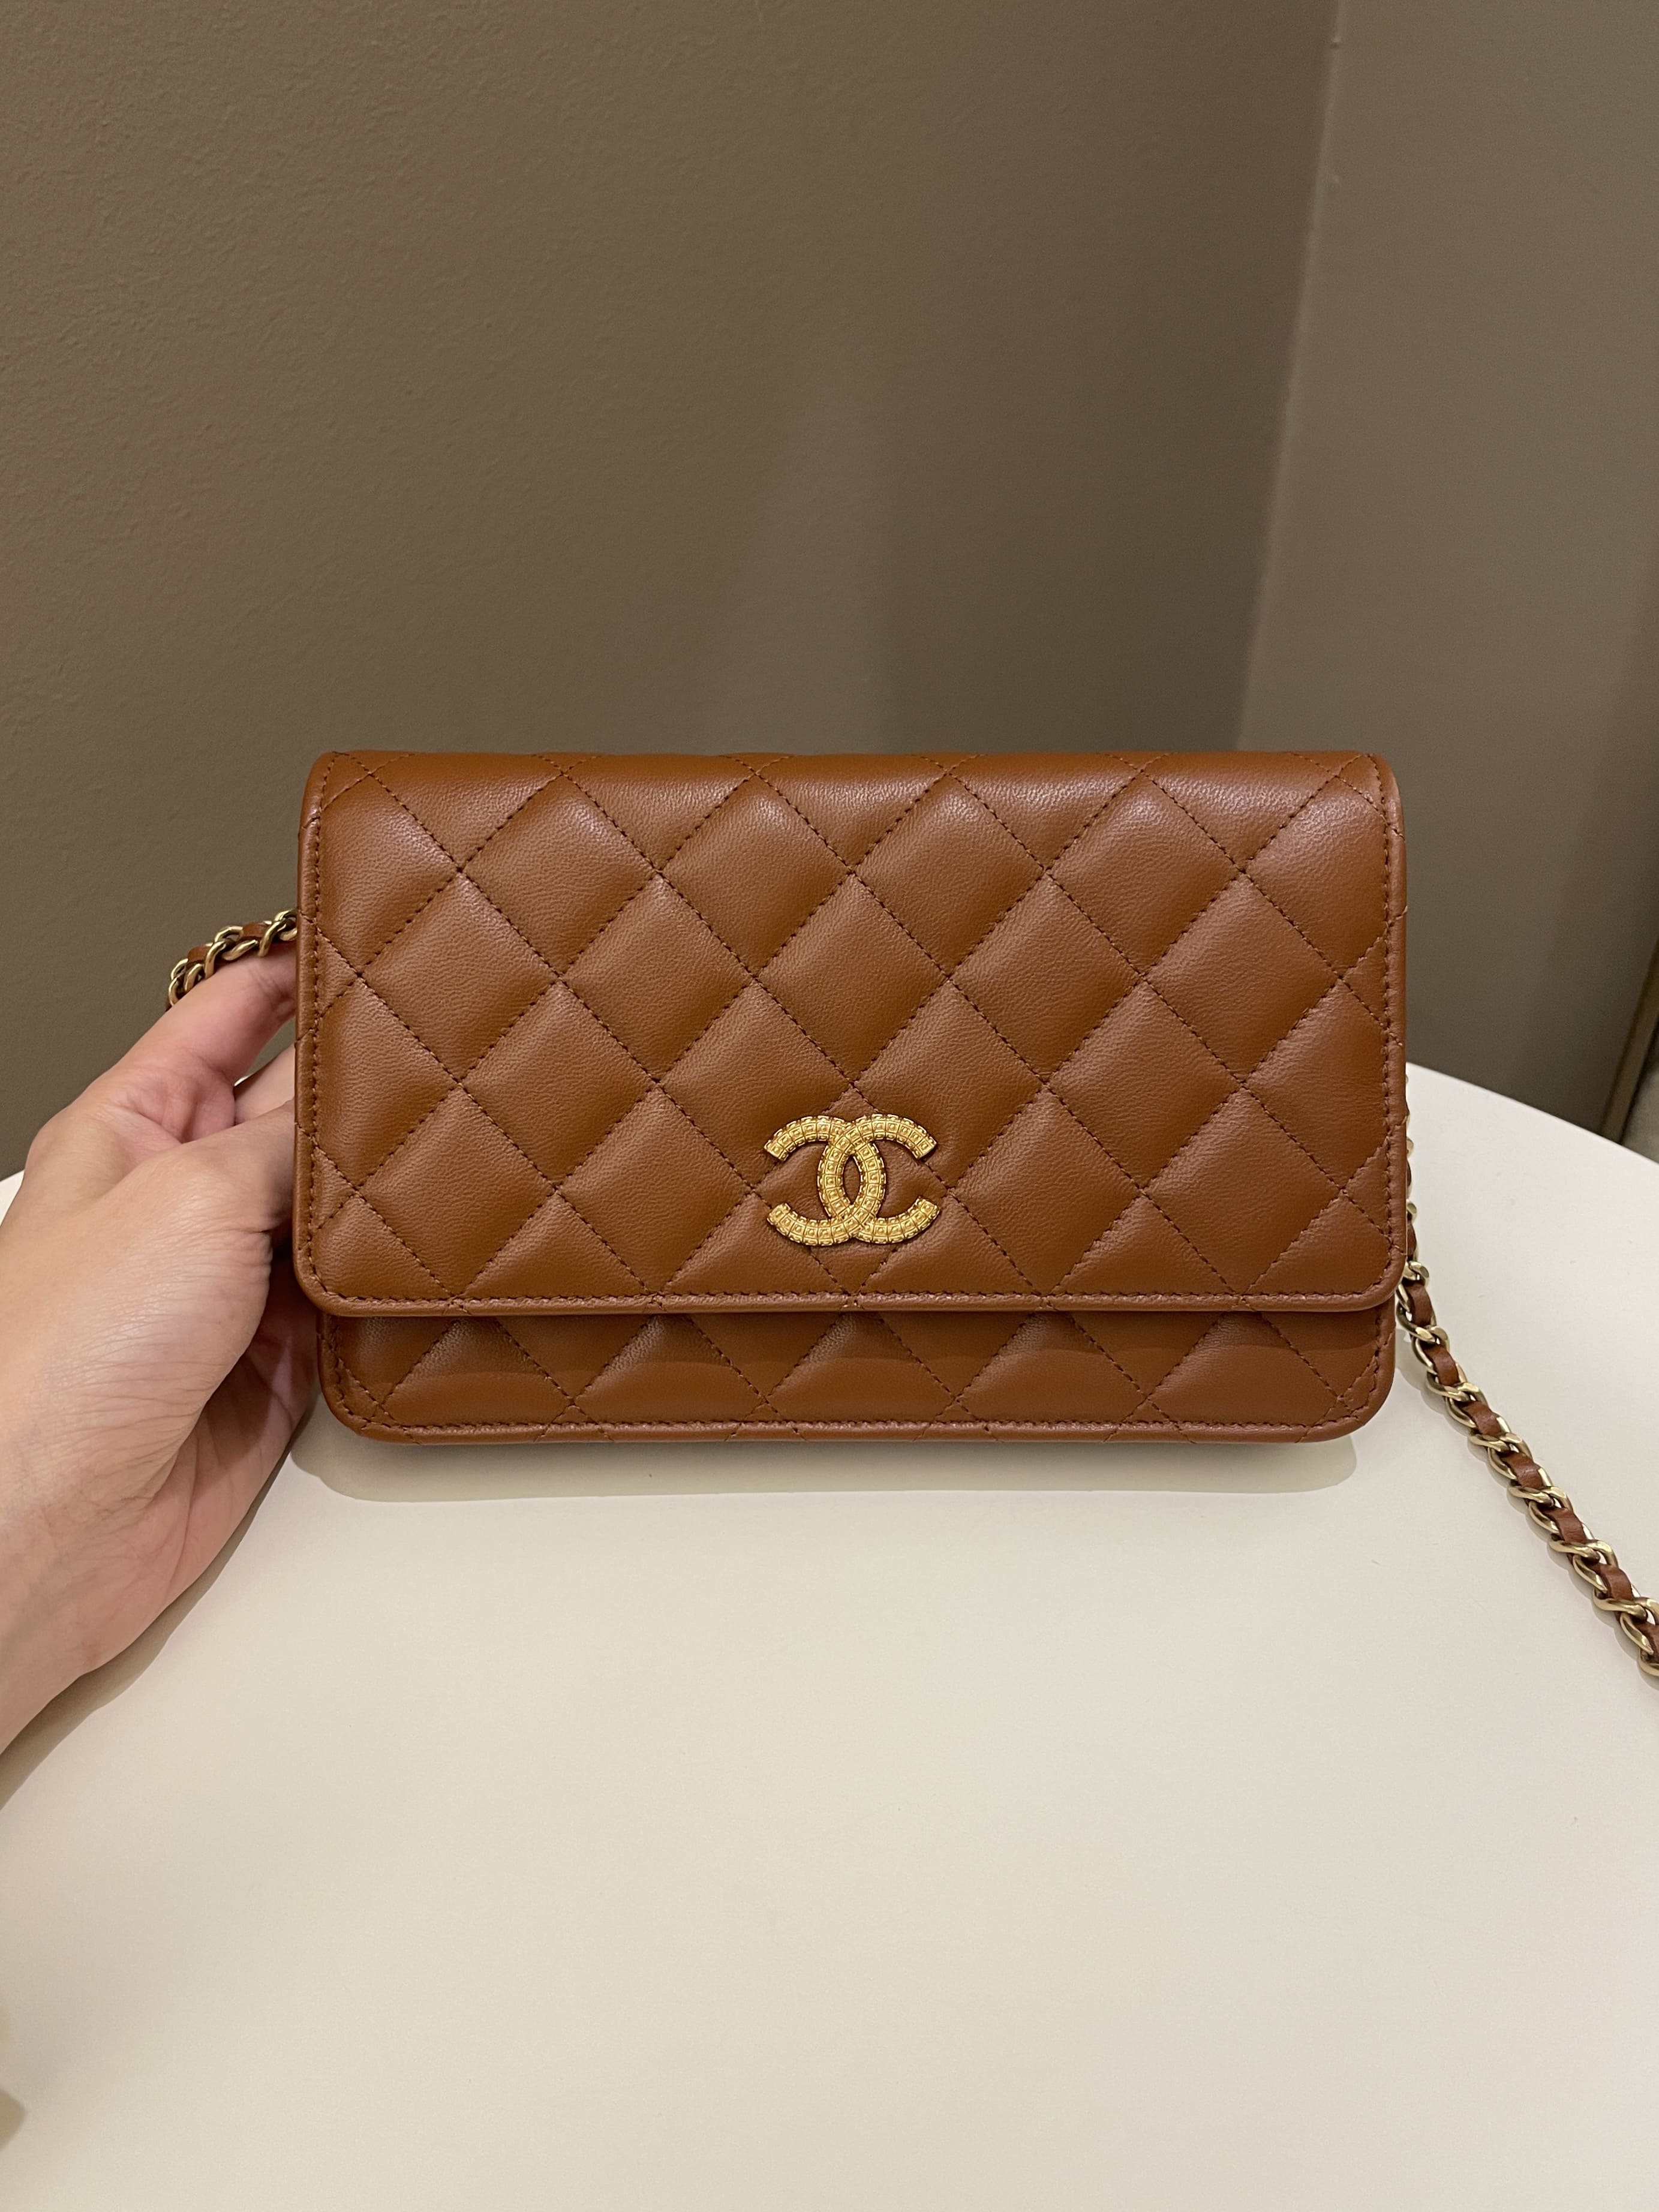 CHANEL, Bags, Chanel 9 Caramel Wallet On Chain